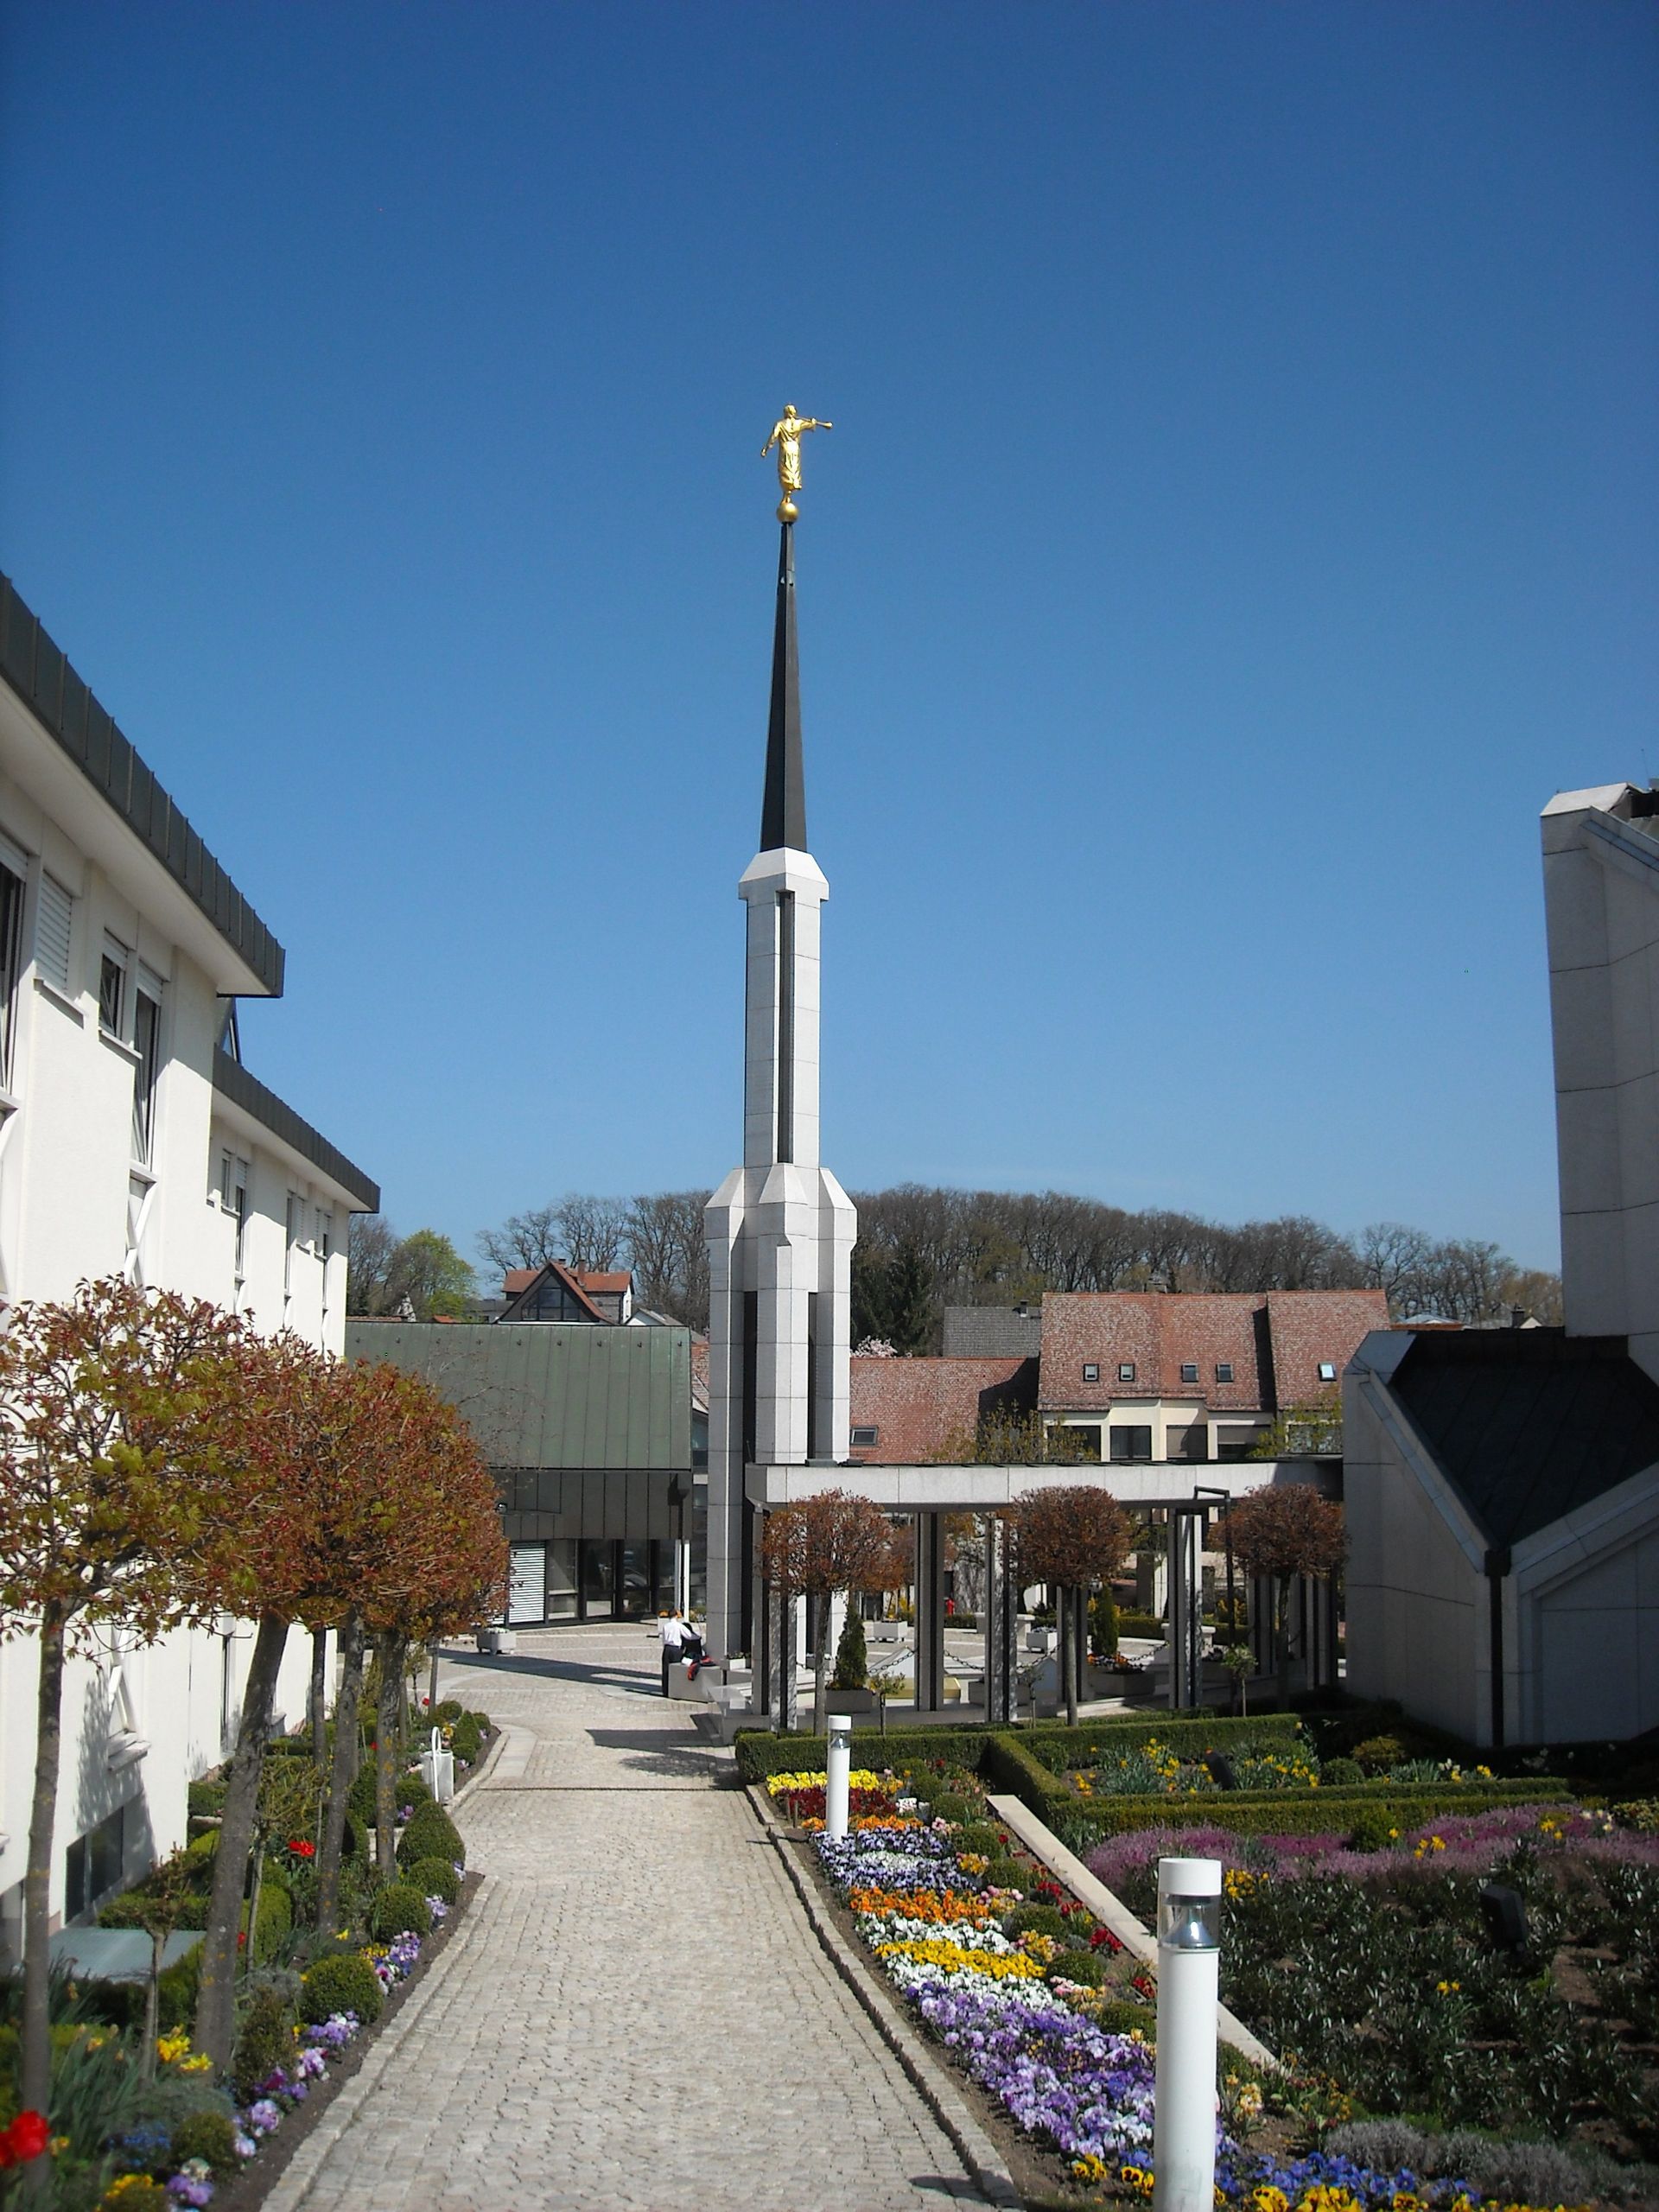 The grounds of the Frankfurt Germany Temple.